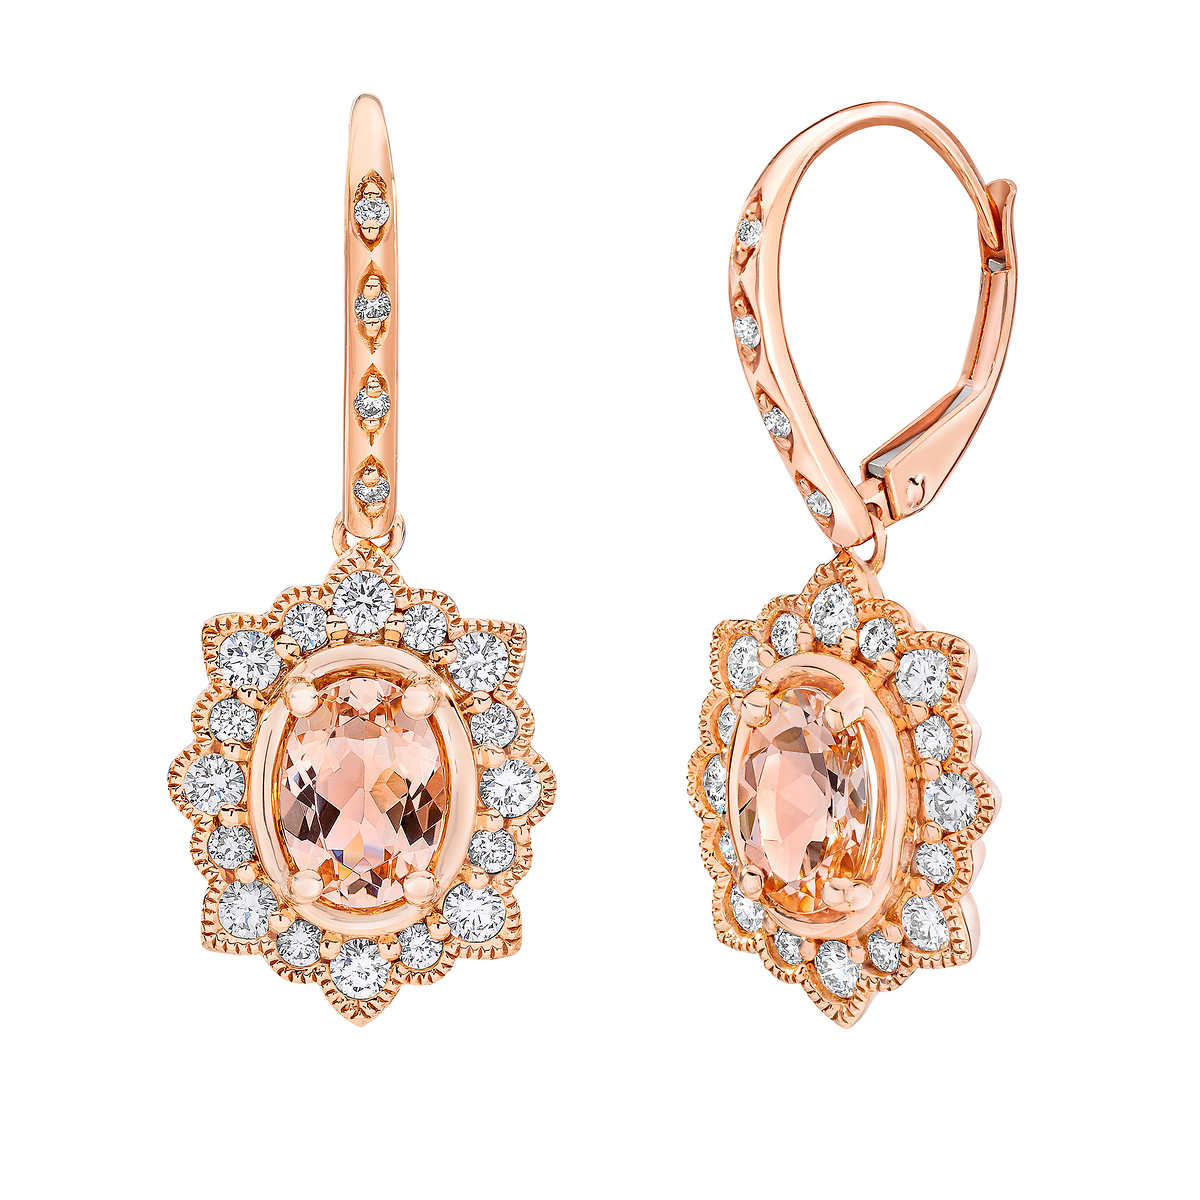 Gemstone Oval Shape 10k Rose Gold Earrings for Women Details about   Morganite 3.66 Ct 